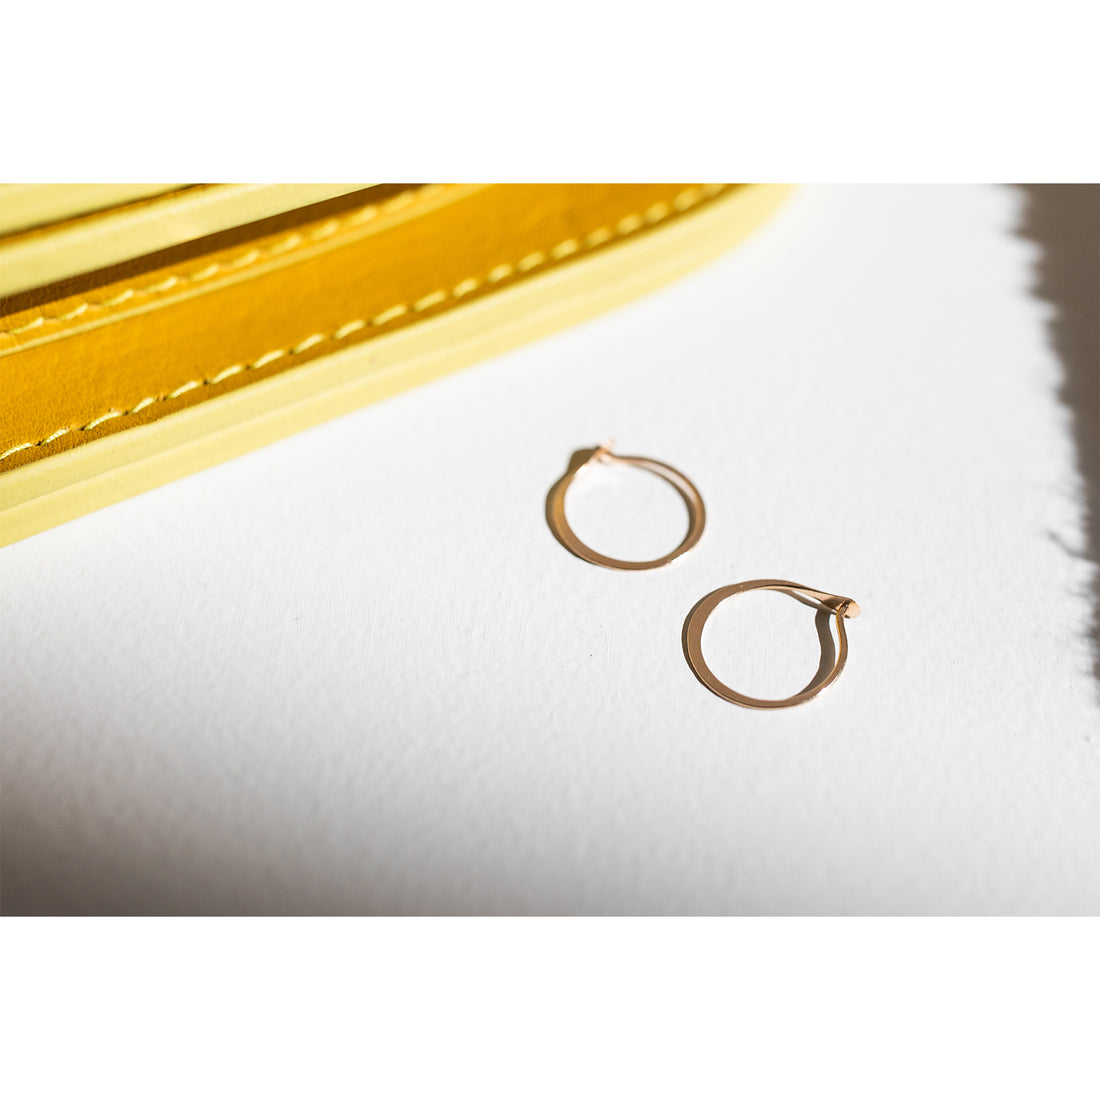 Melissa Joy Manning Small Forged Round Hoops in 14k Gold